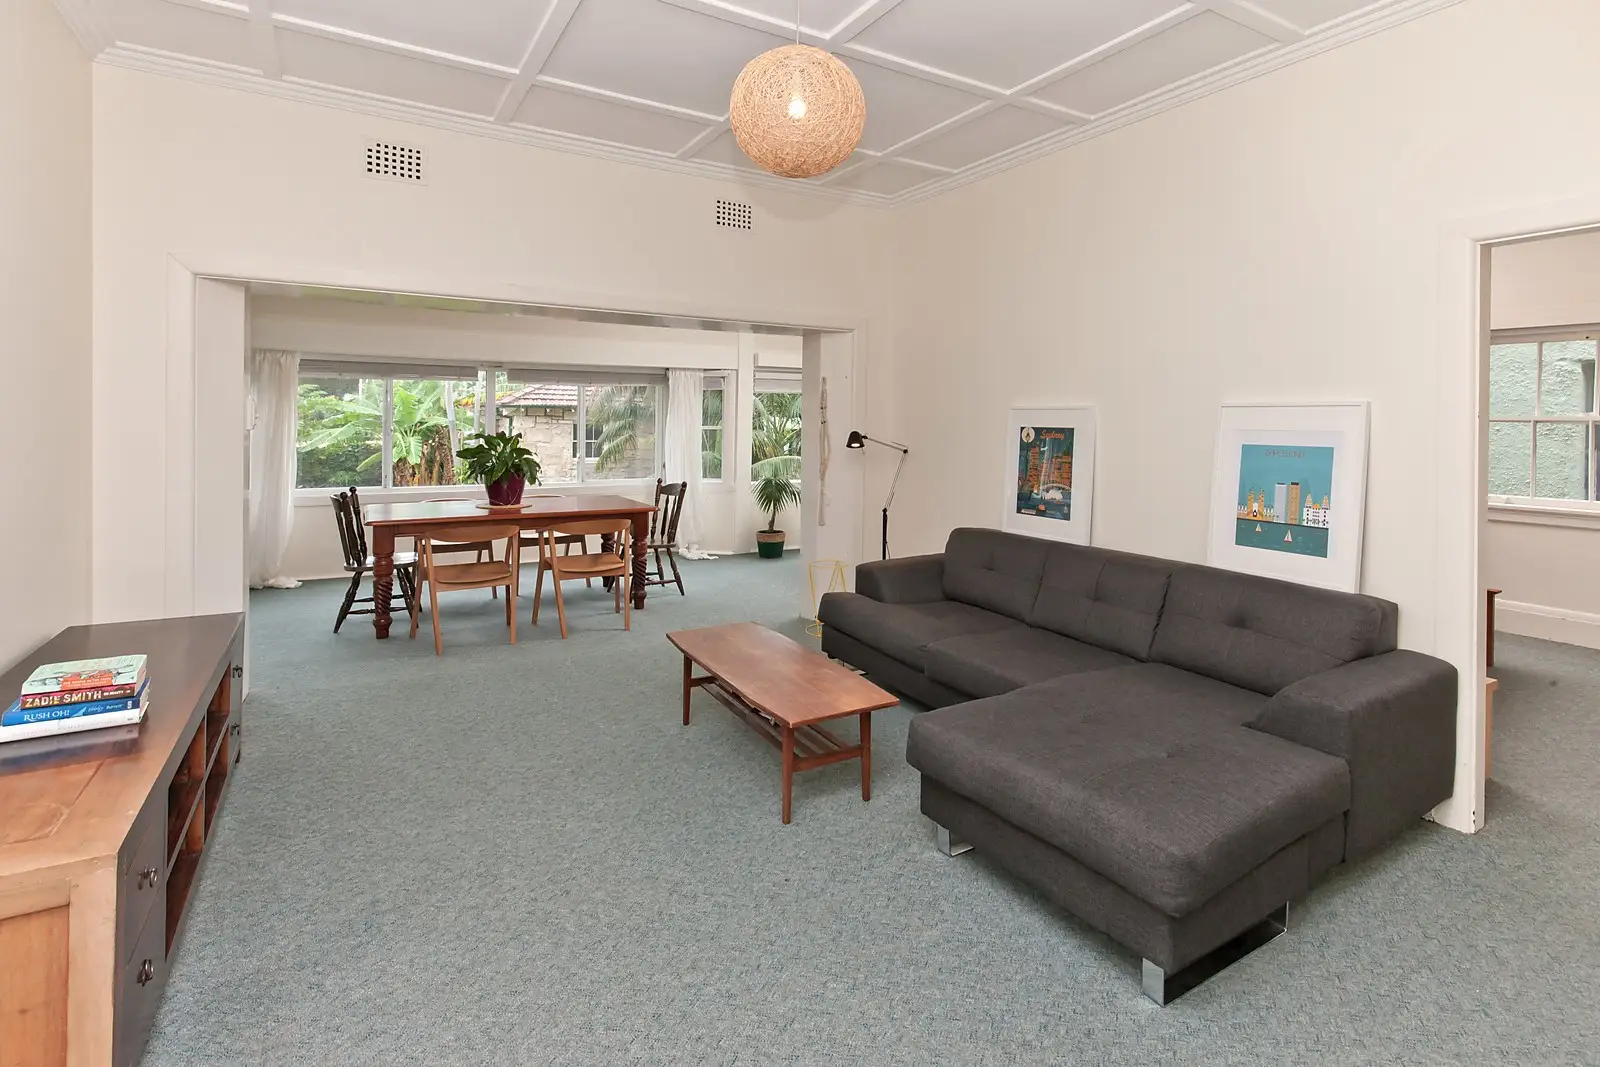 Photo #2: 4/9 Shellcove Road, Neutral Bay - Sold by Sydney Sotheby's International Realty